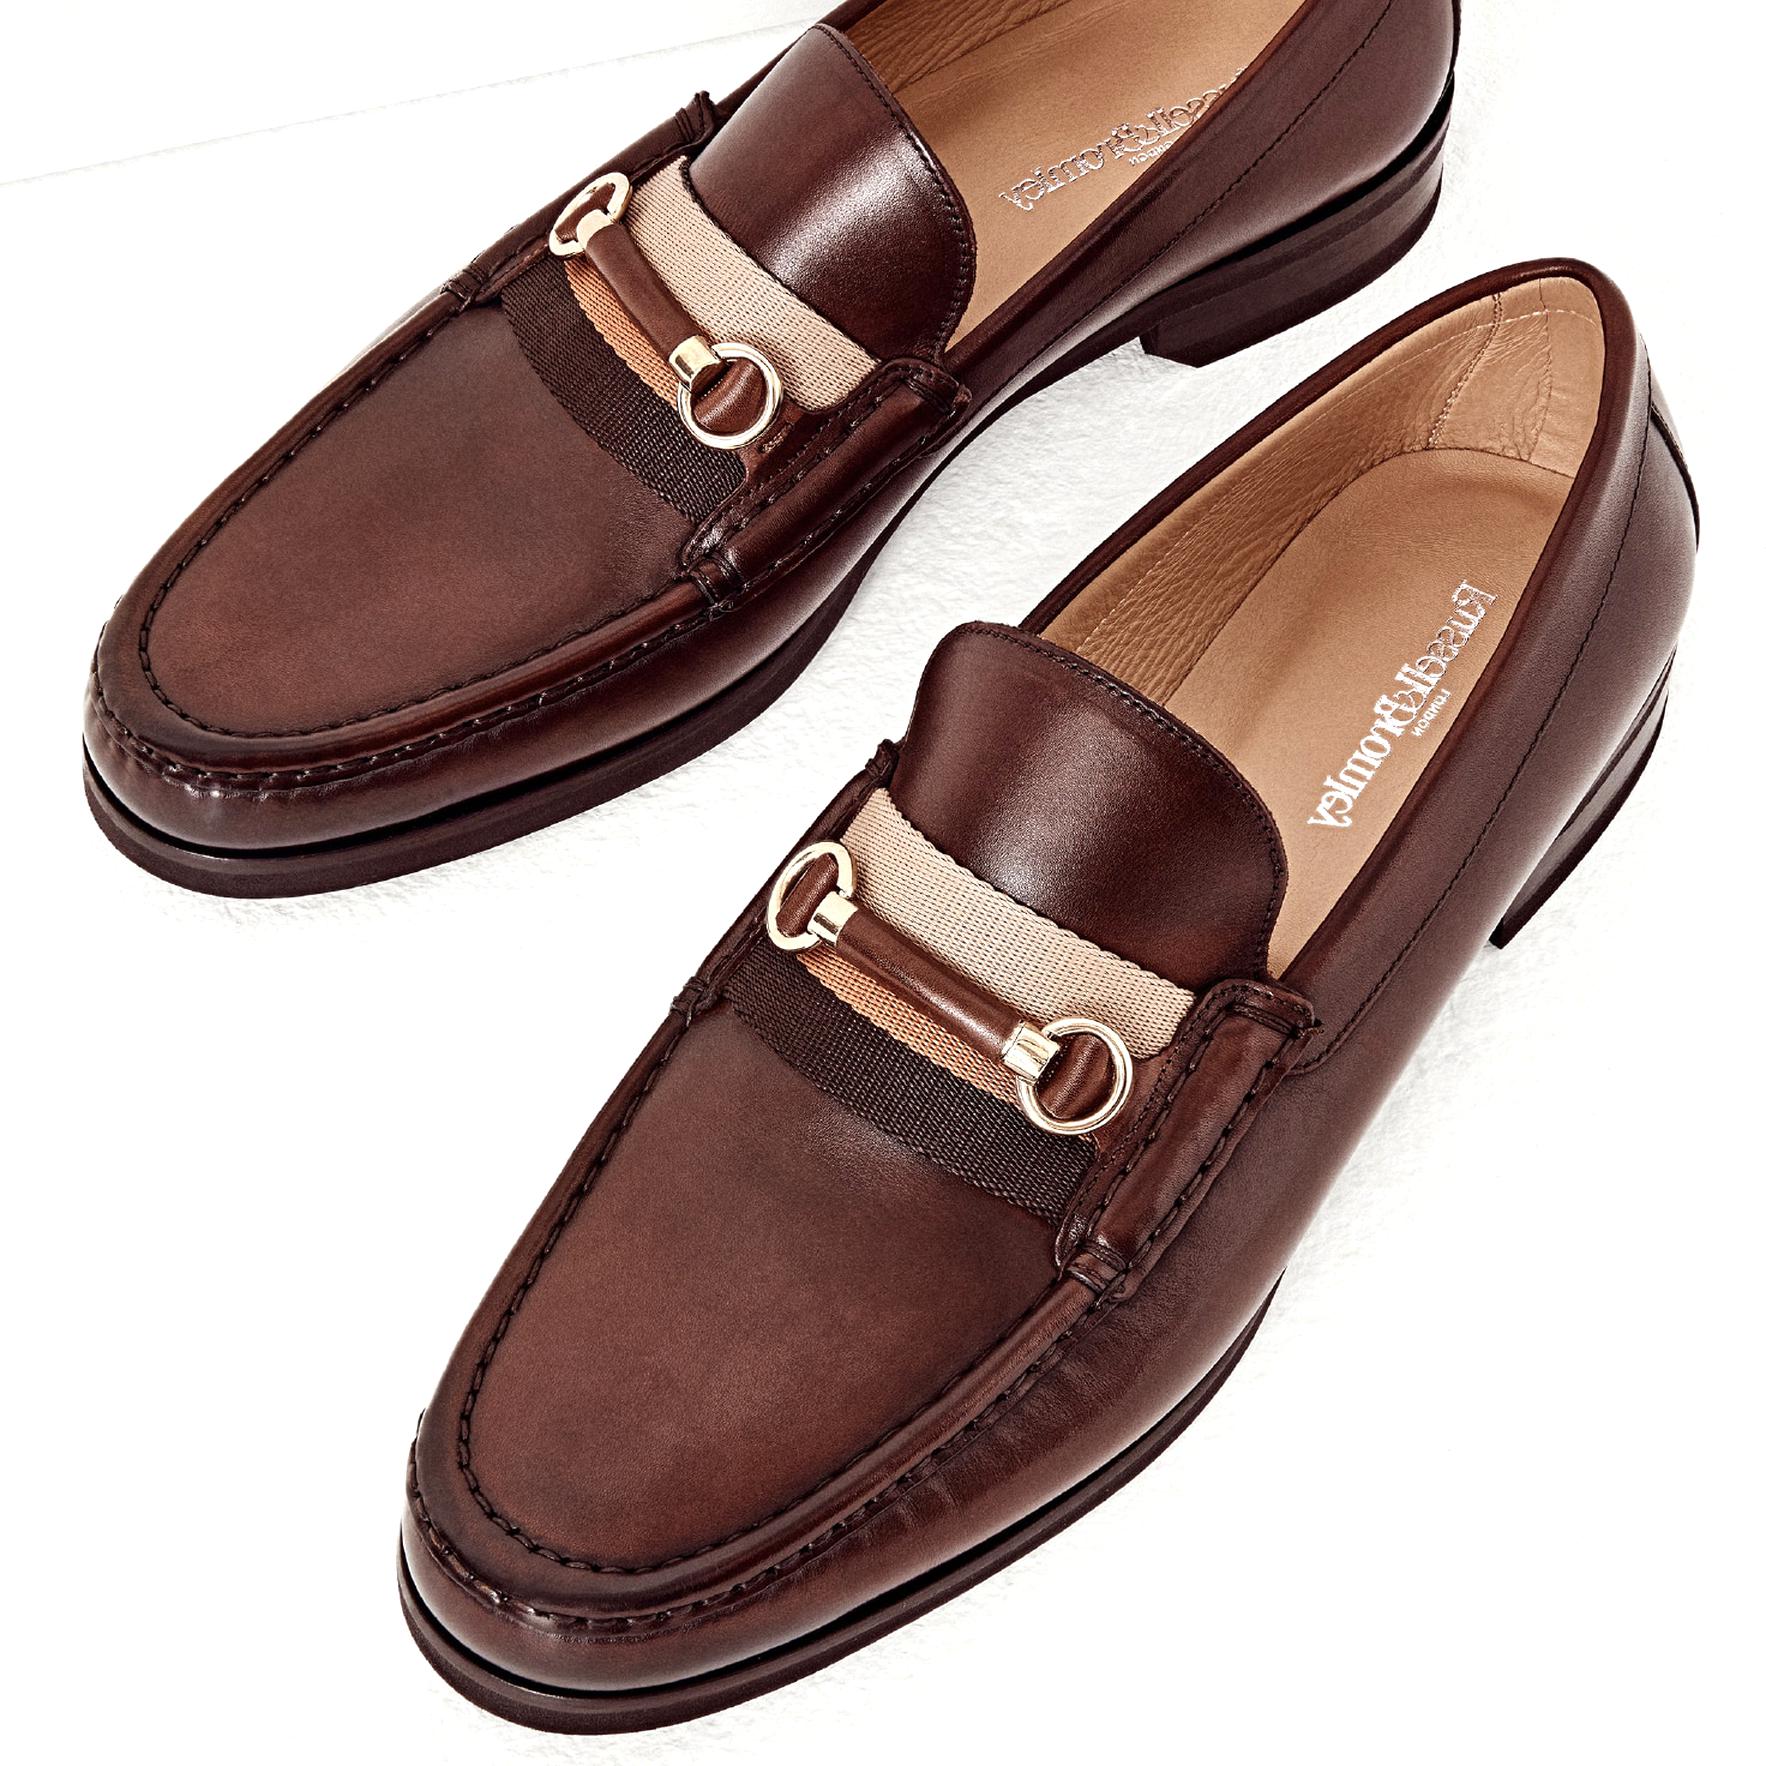 russell and bromley shoes usa